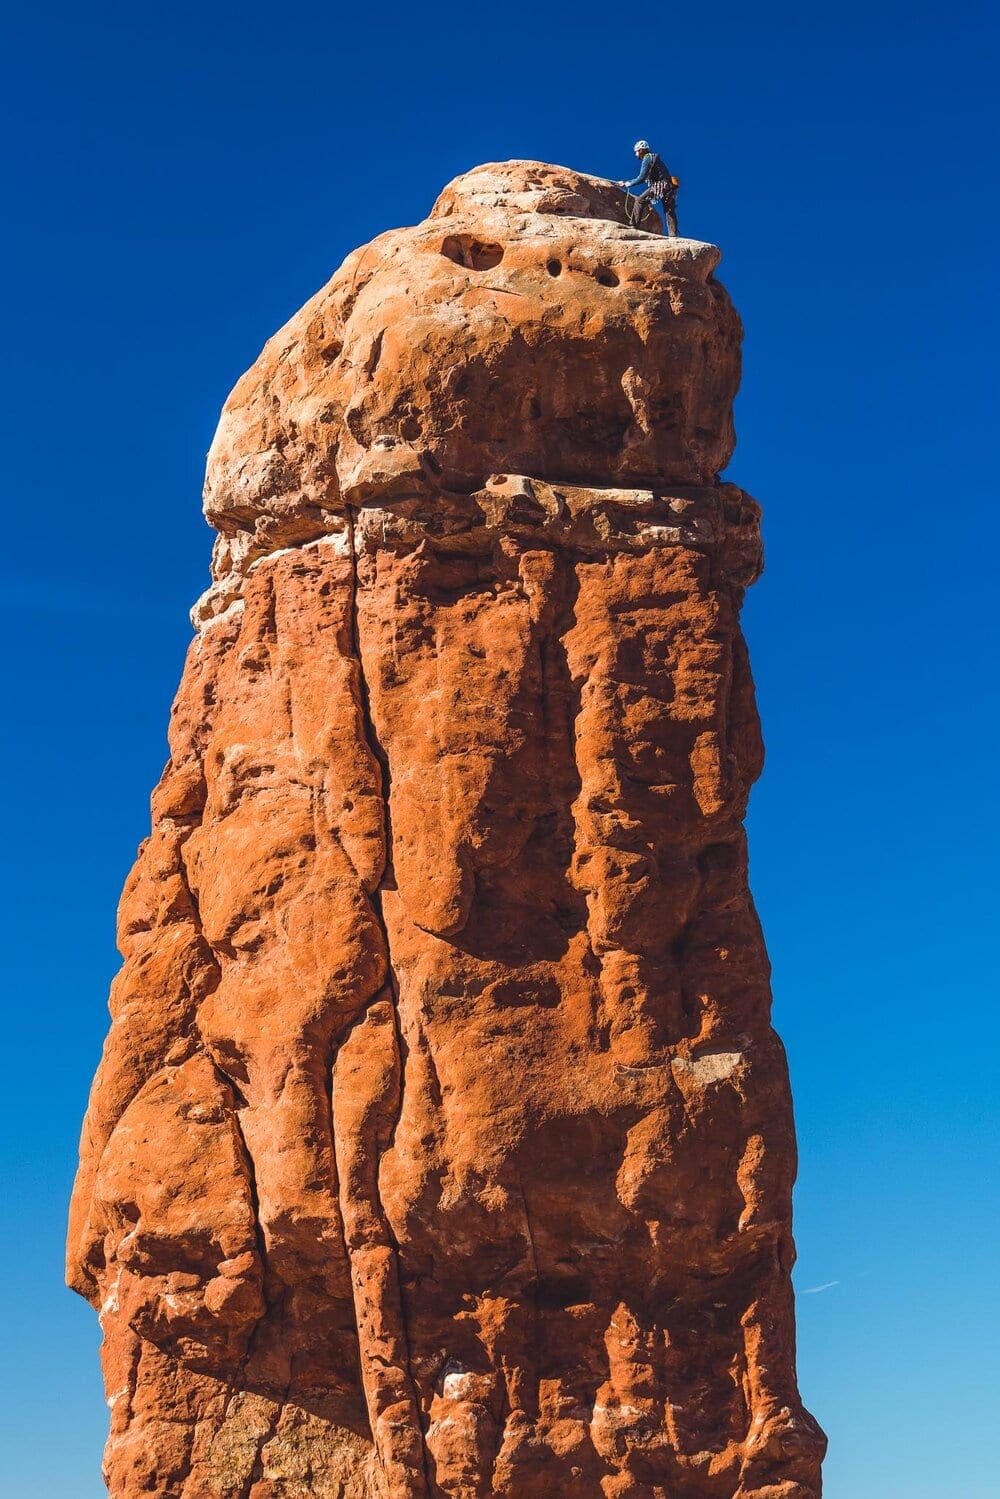 Owl Rock is a classic climb in the Garden of Eden at Arches National Park, Utah.